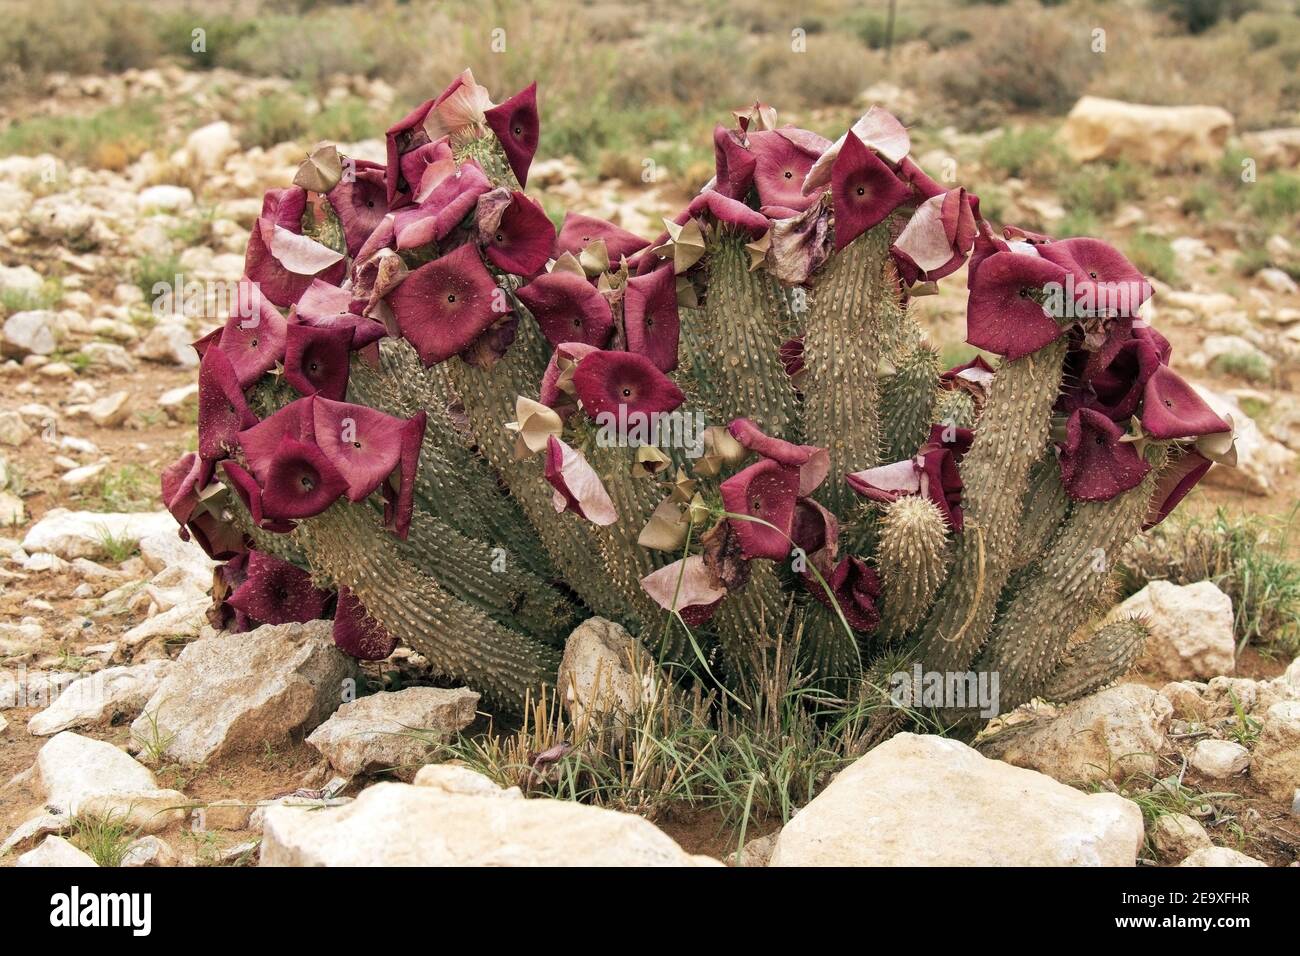 The hoodia flowering plant in Namibia Stock Photo